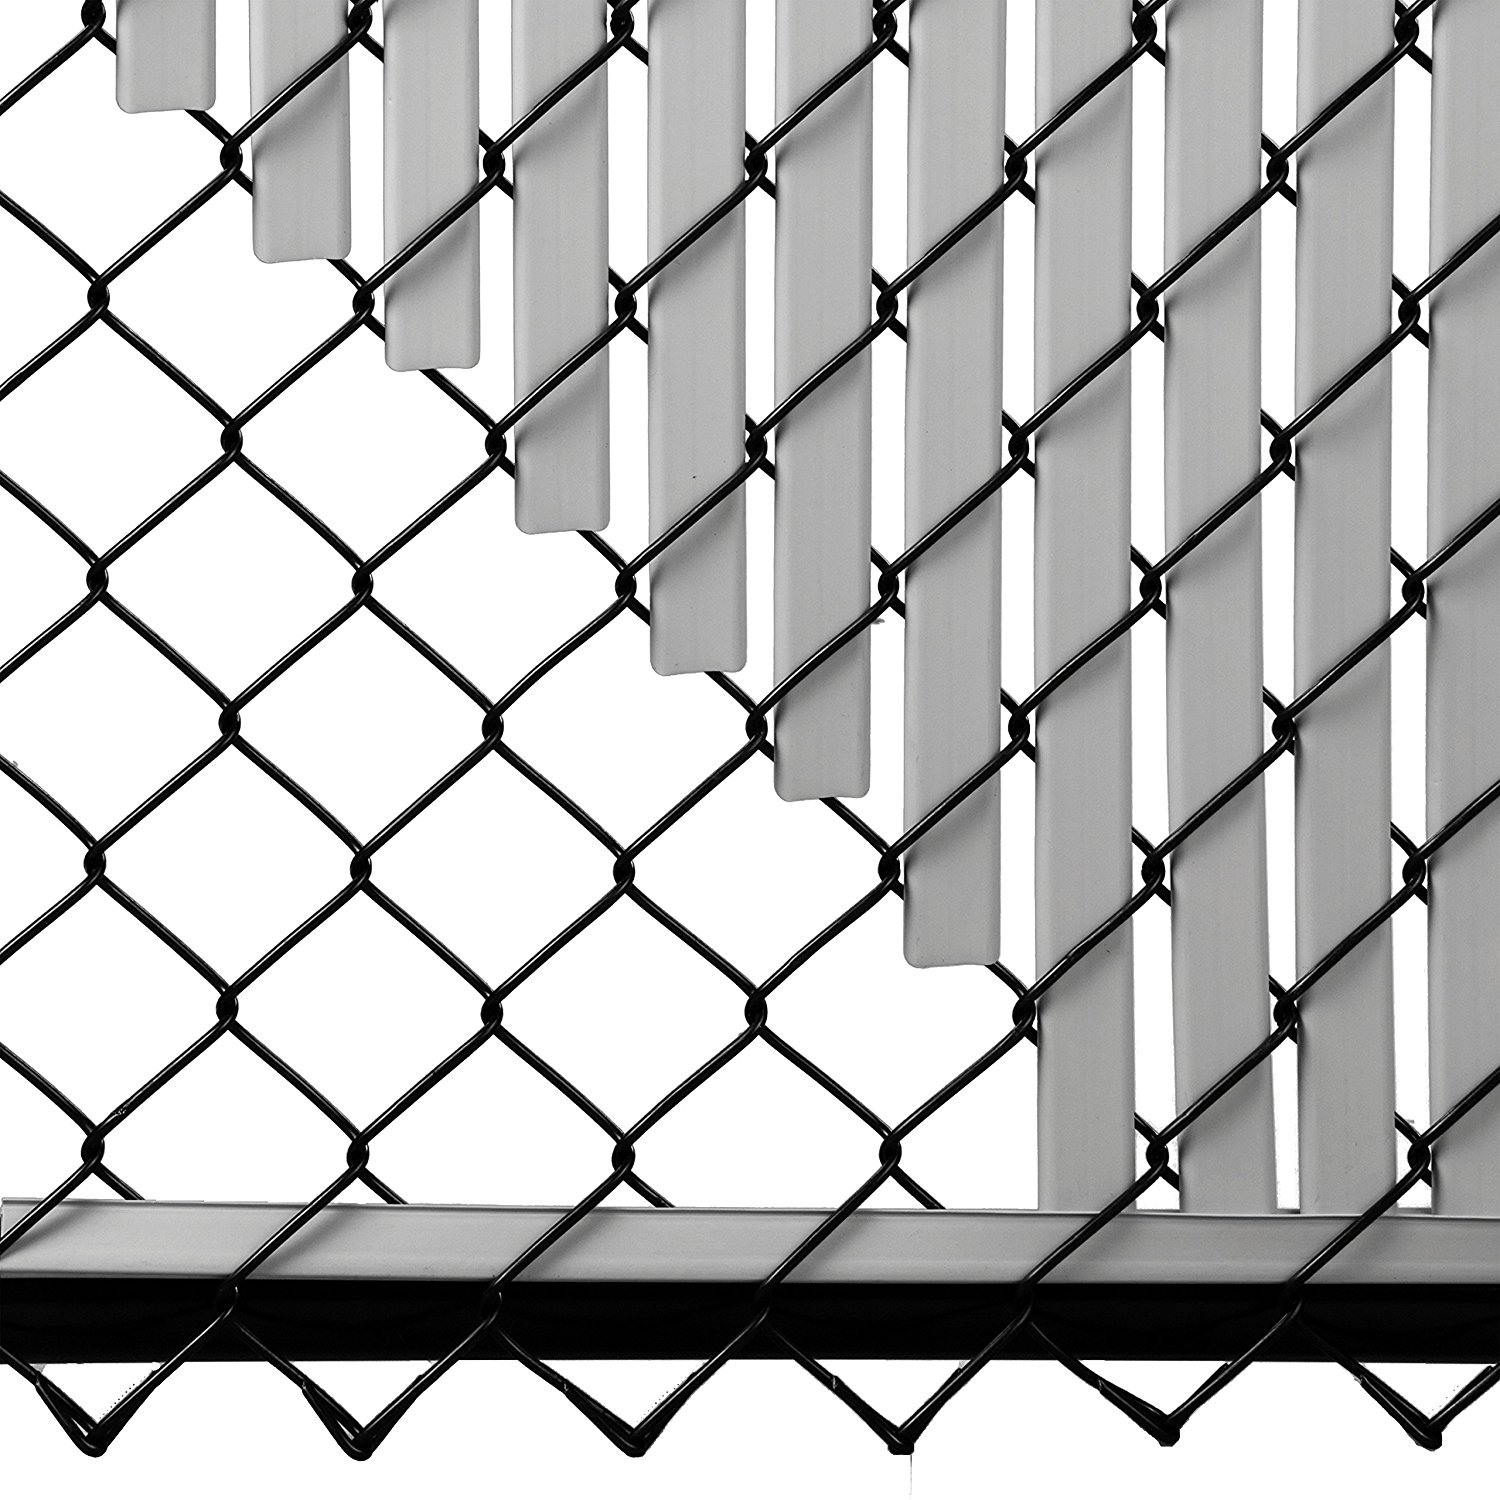 Chain Link Fence Drawing at GetDrawings.com | Free for personal use ...